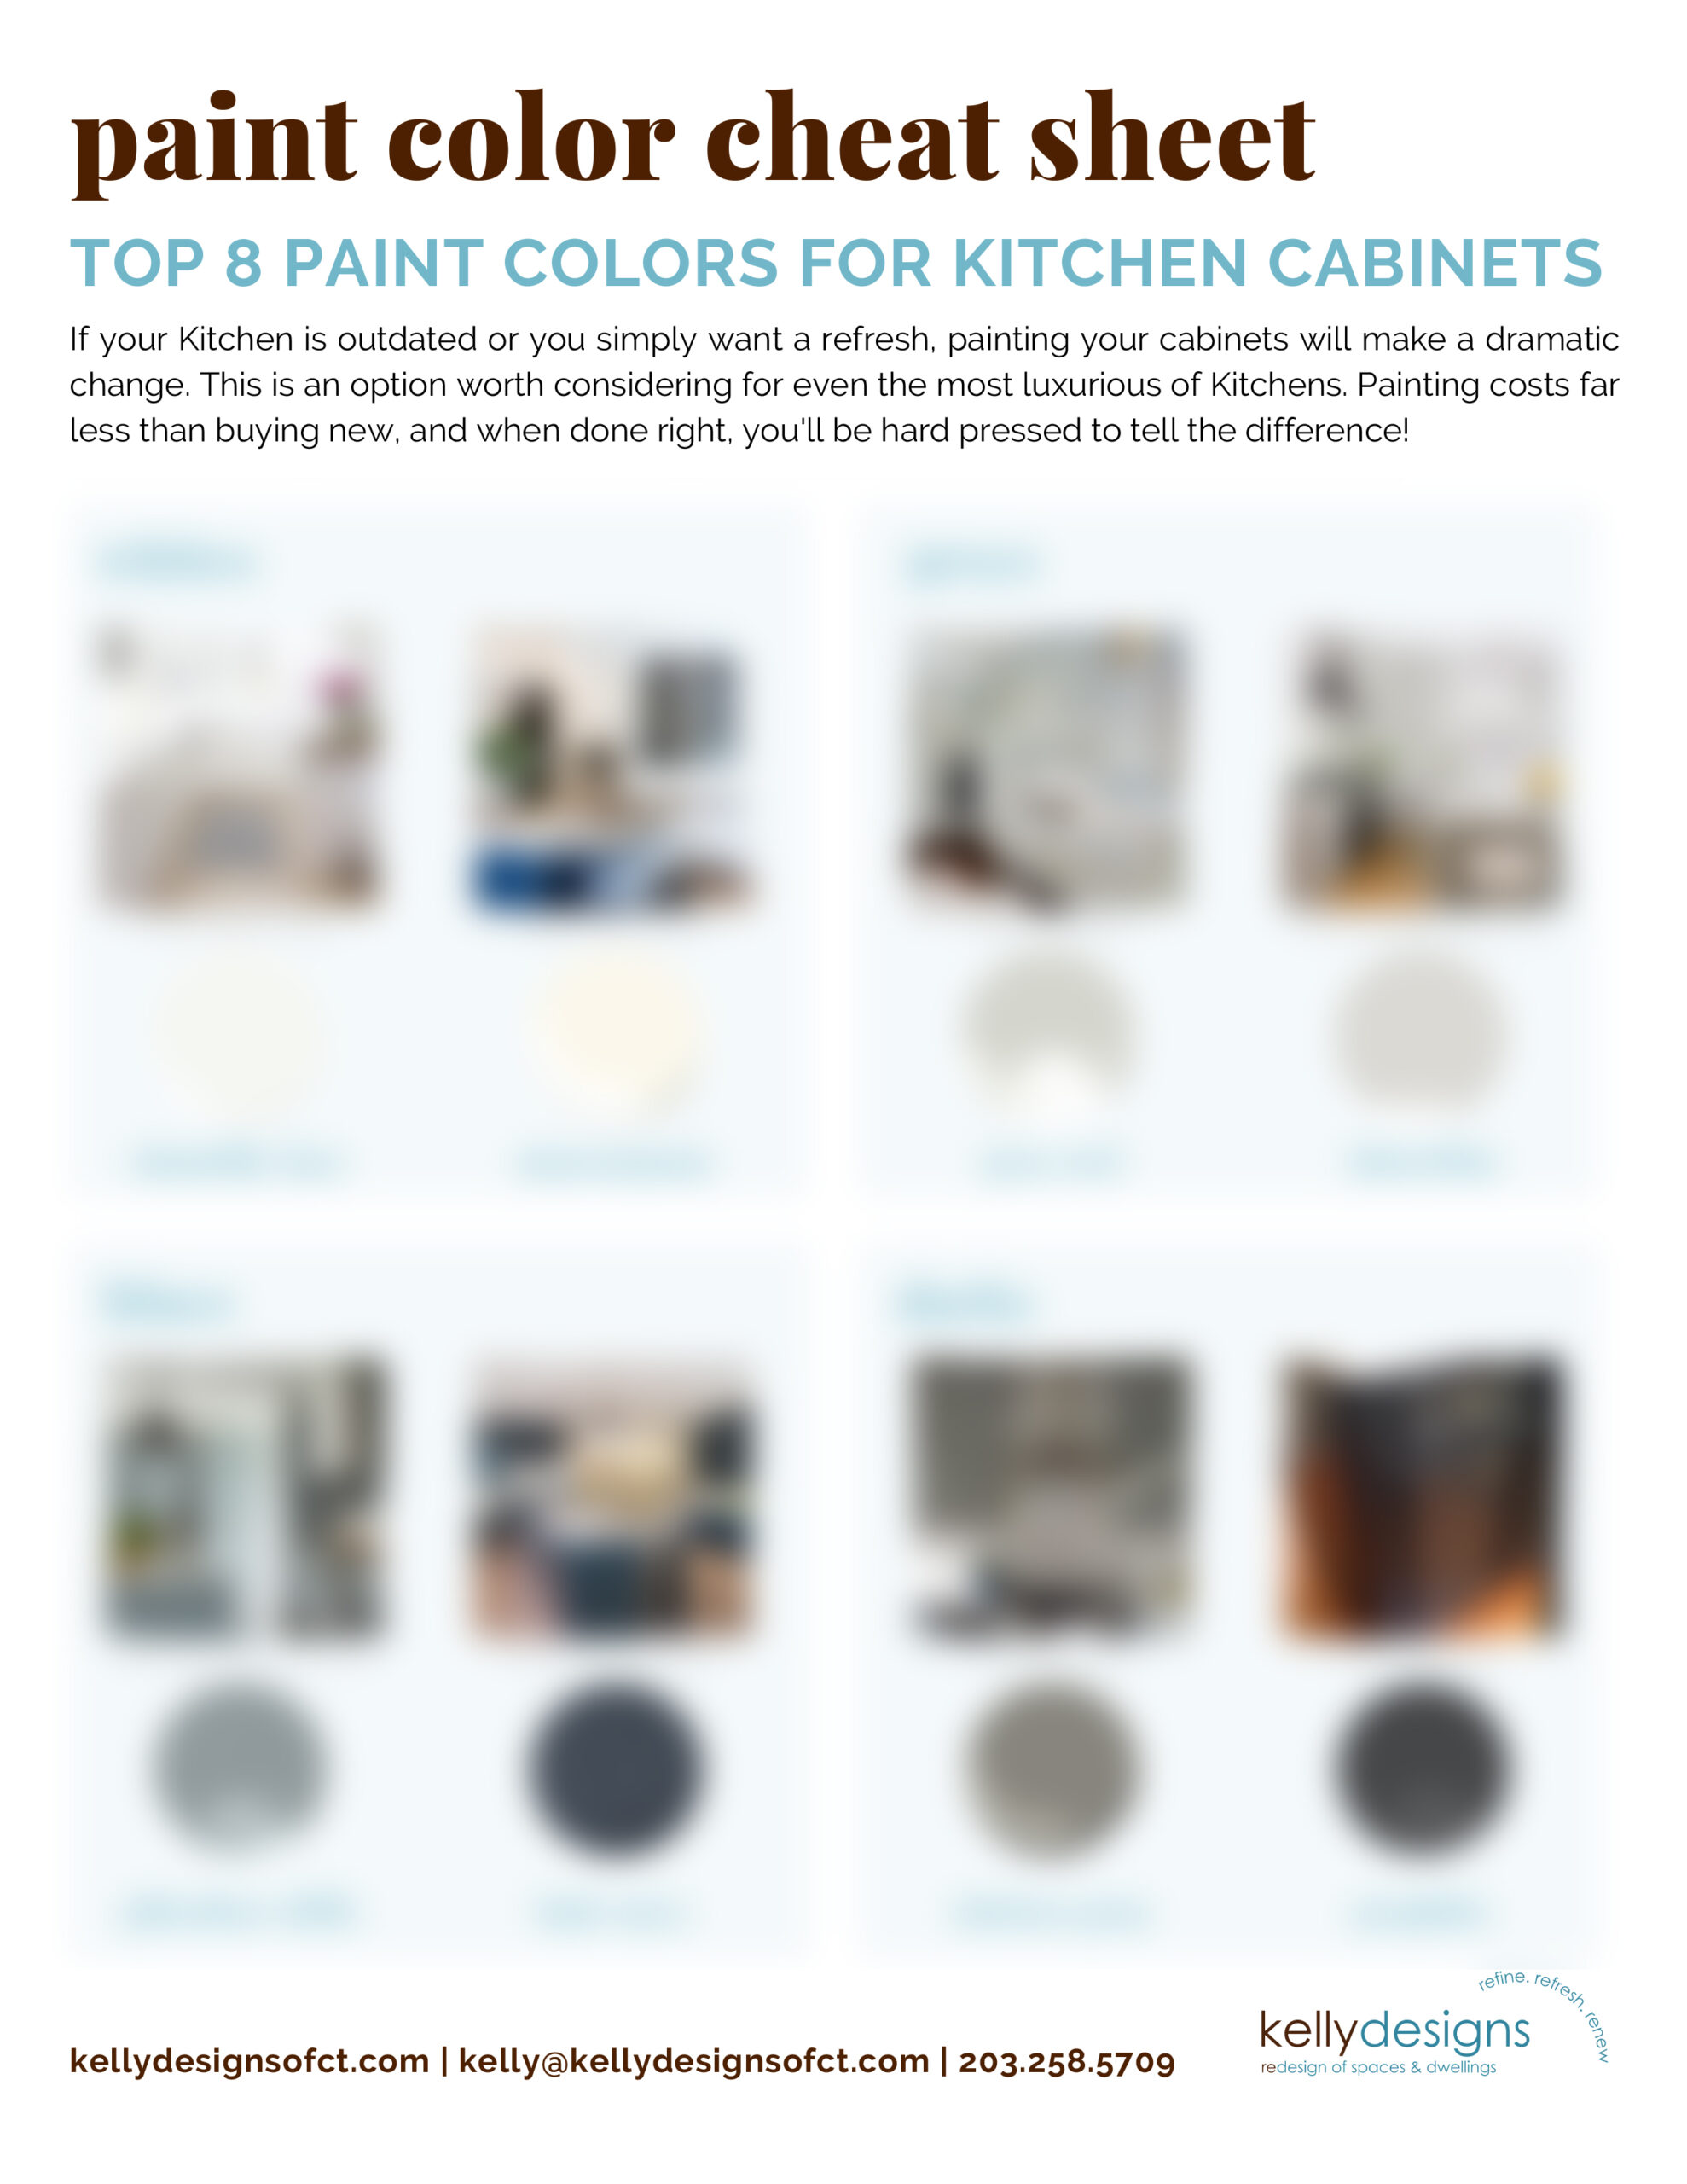 Paint Cheat Sheet for Kitchen Cabinets by kellydesigns